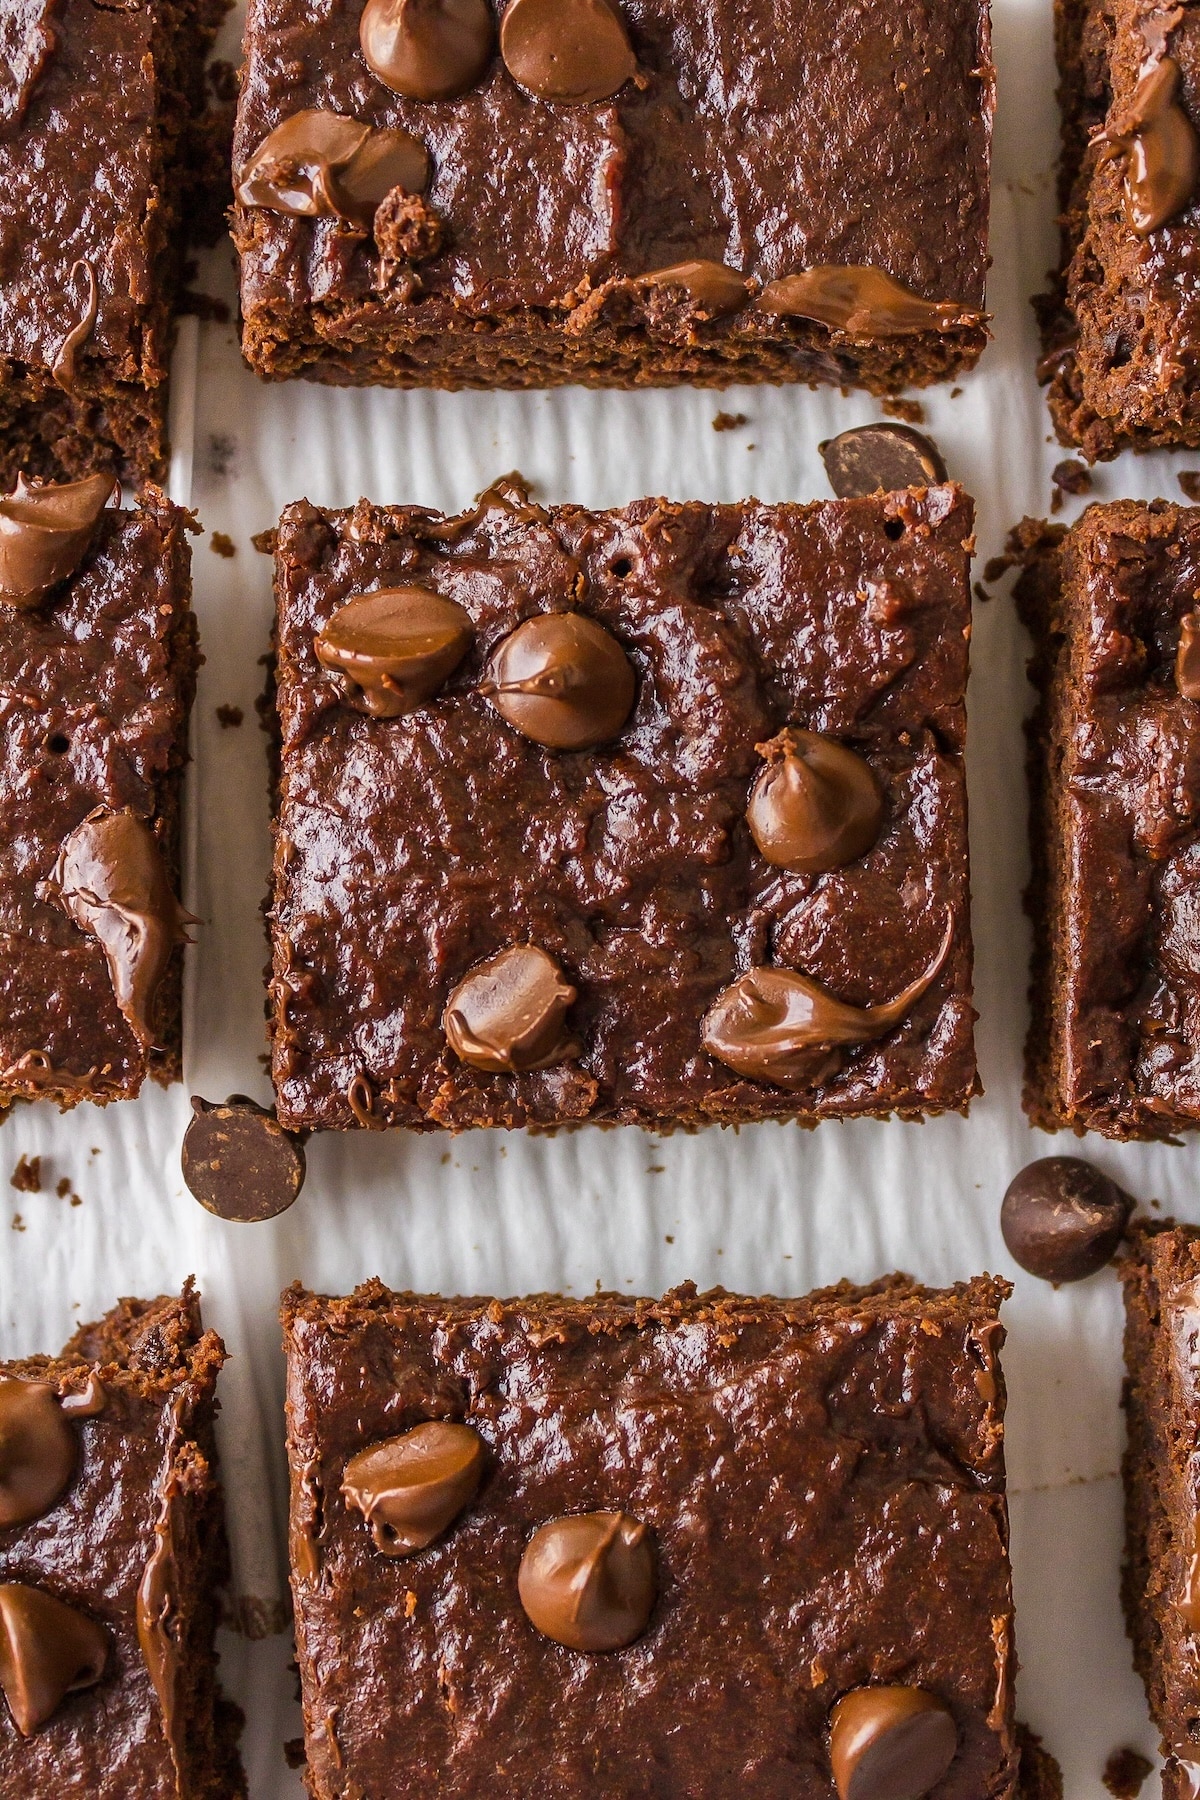 baked dairy-free brownies up close to see texture.